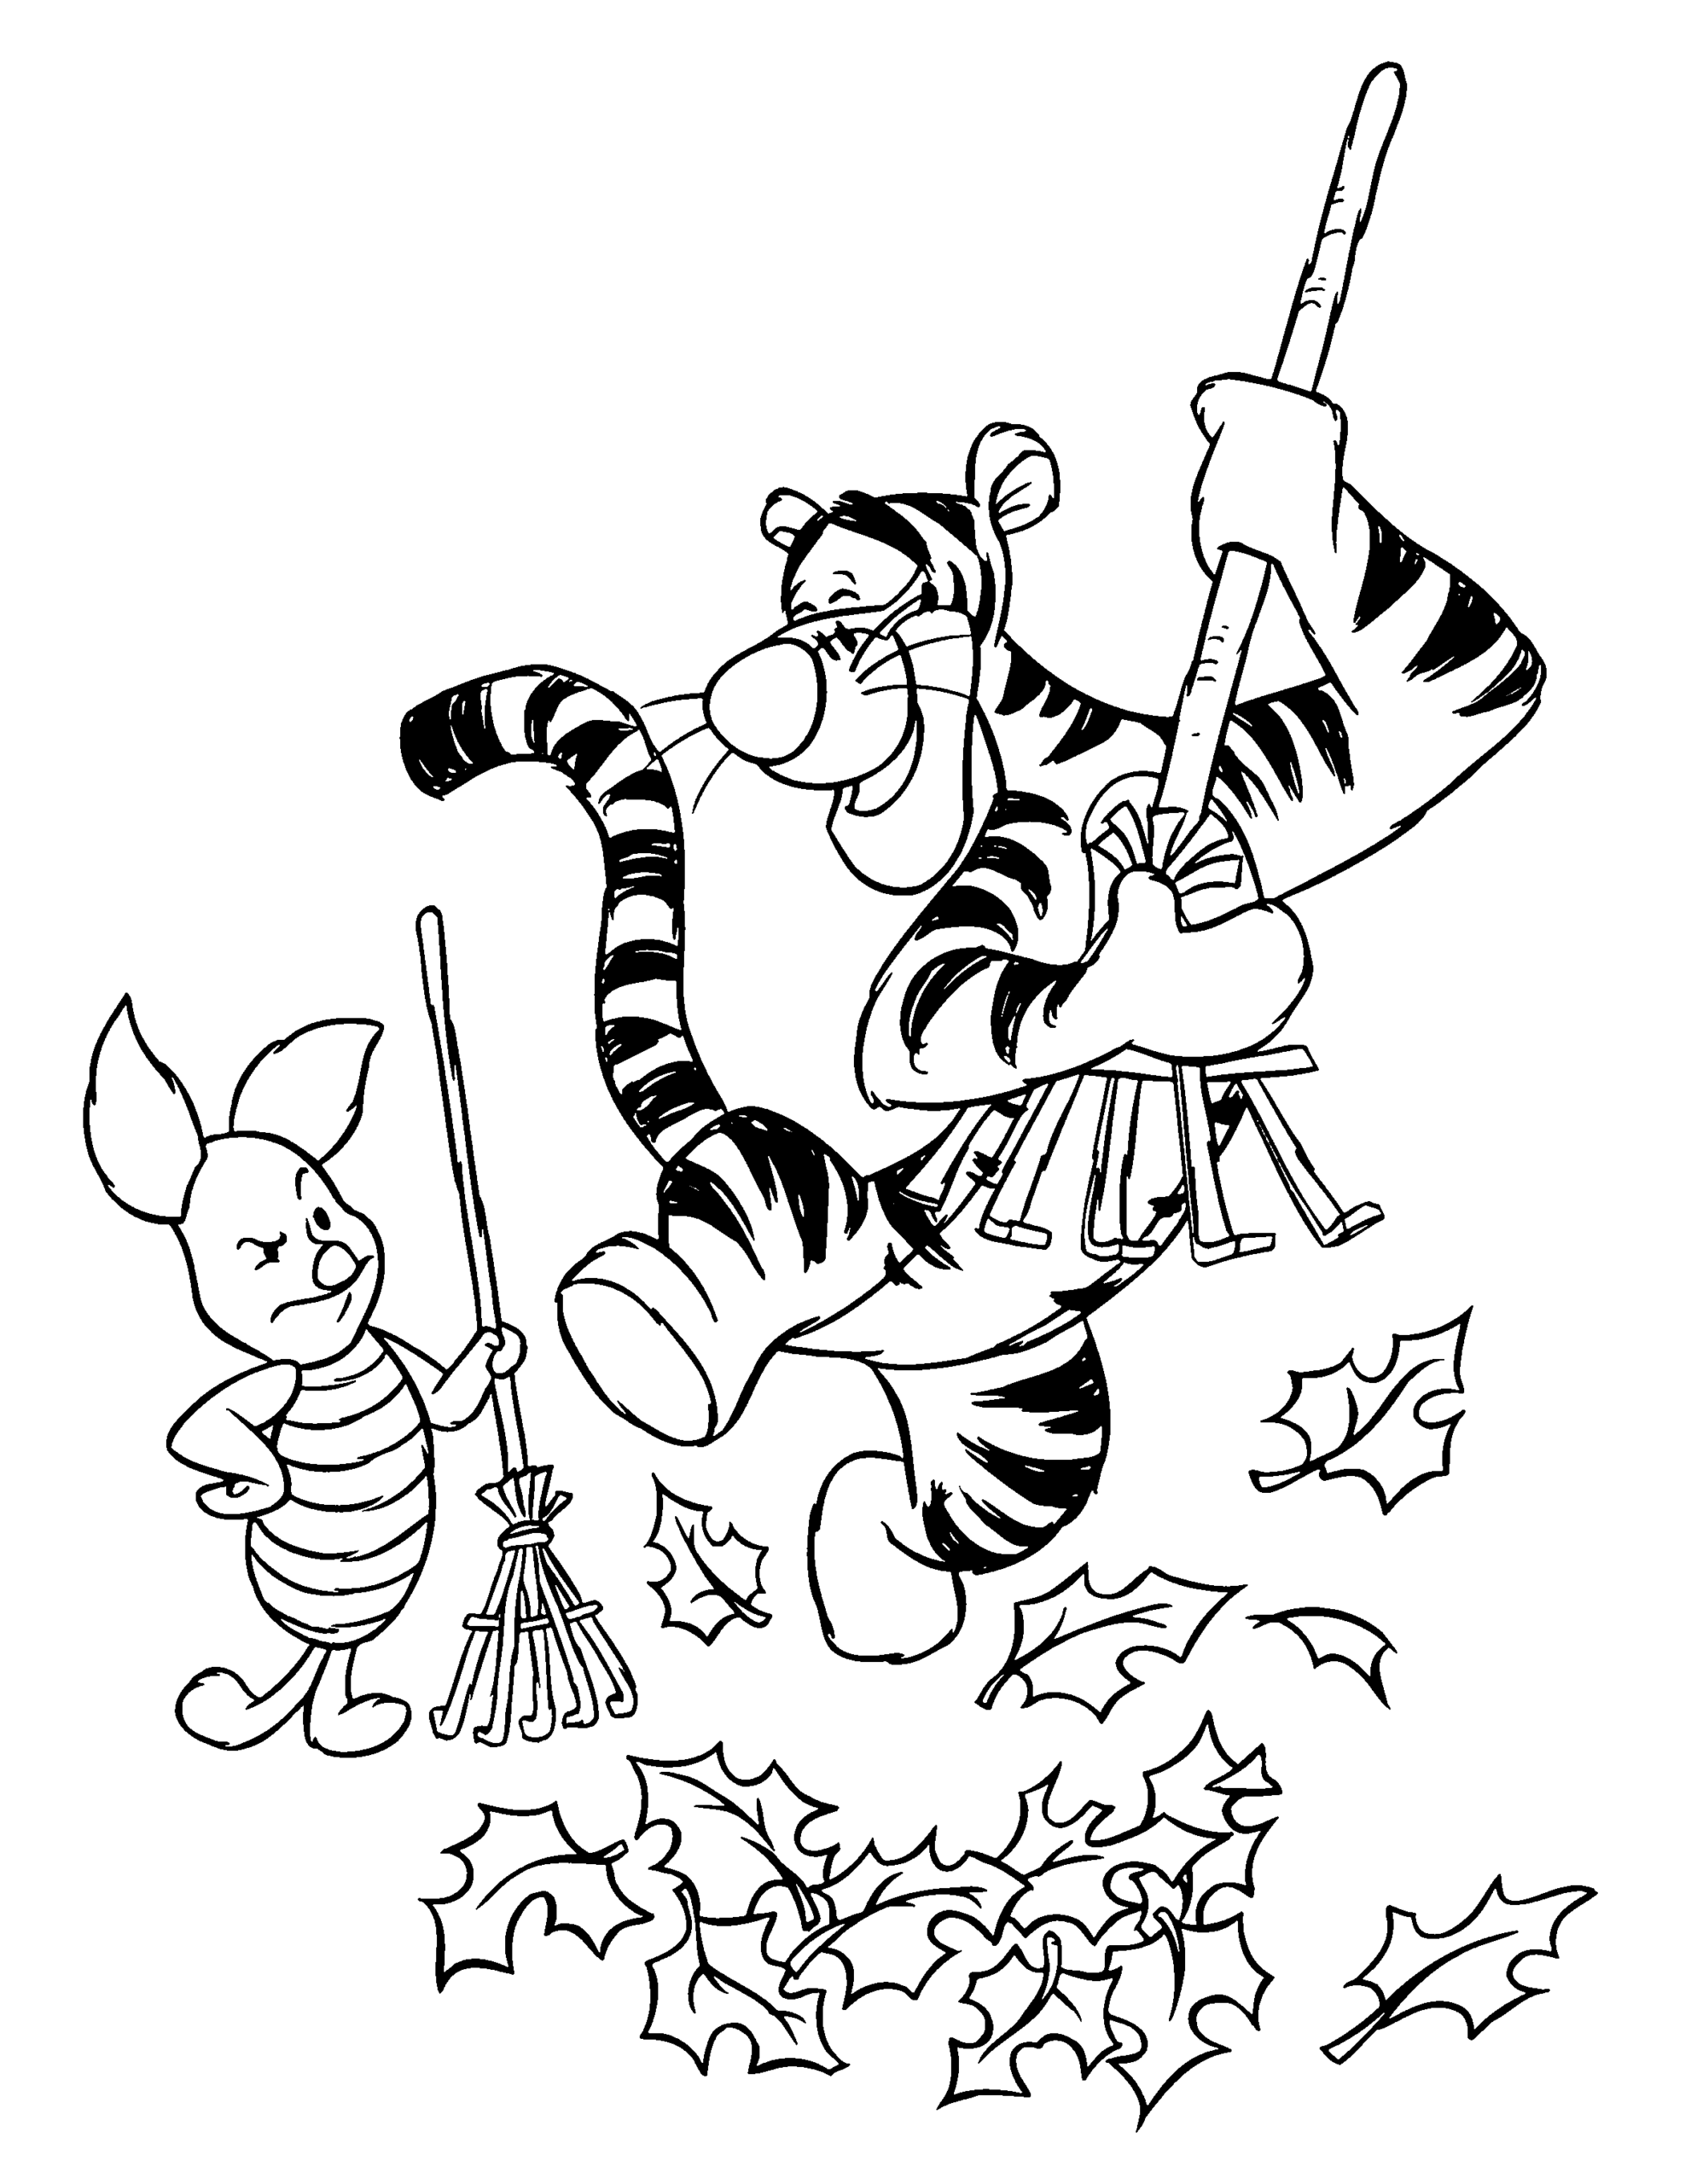 Winnie the Pooh Coloring Pages Cartoons winnie the pooh 49 Printable 2020 7159 Coloring4free